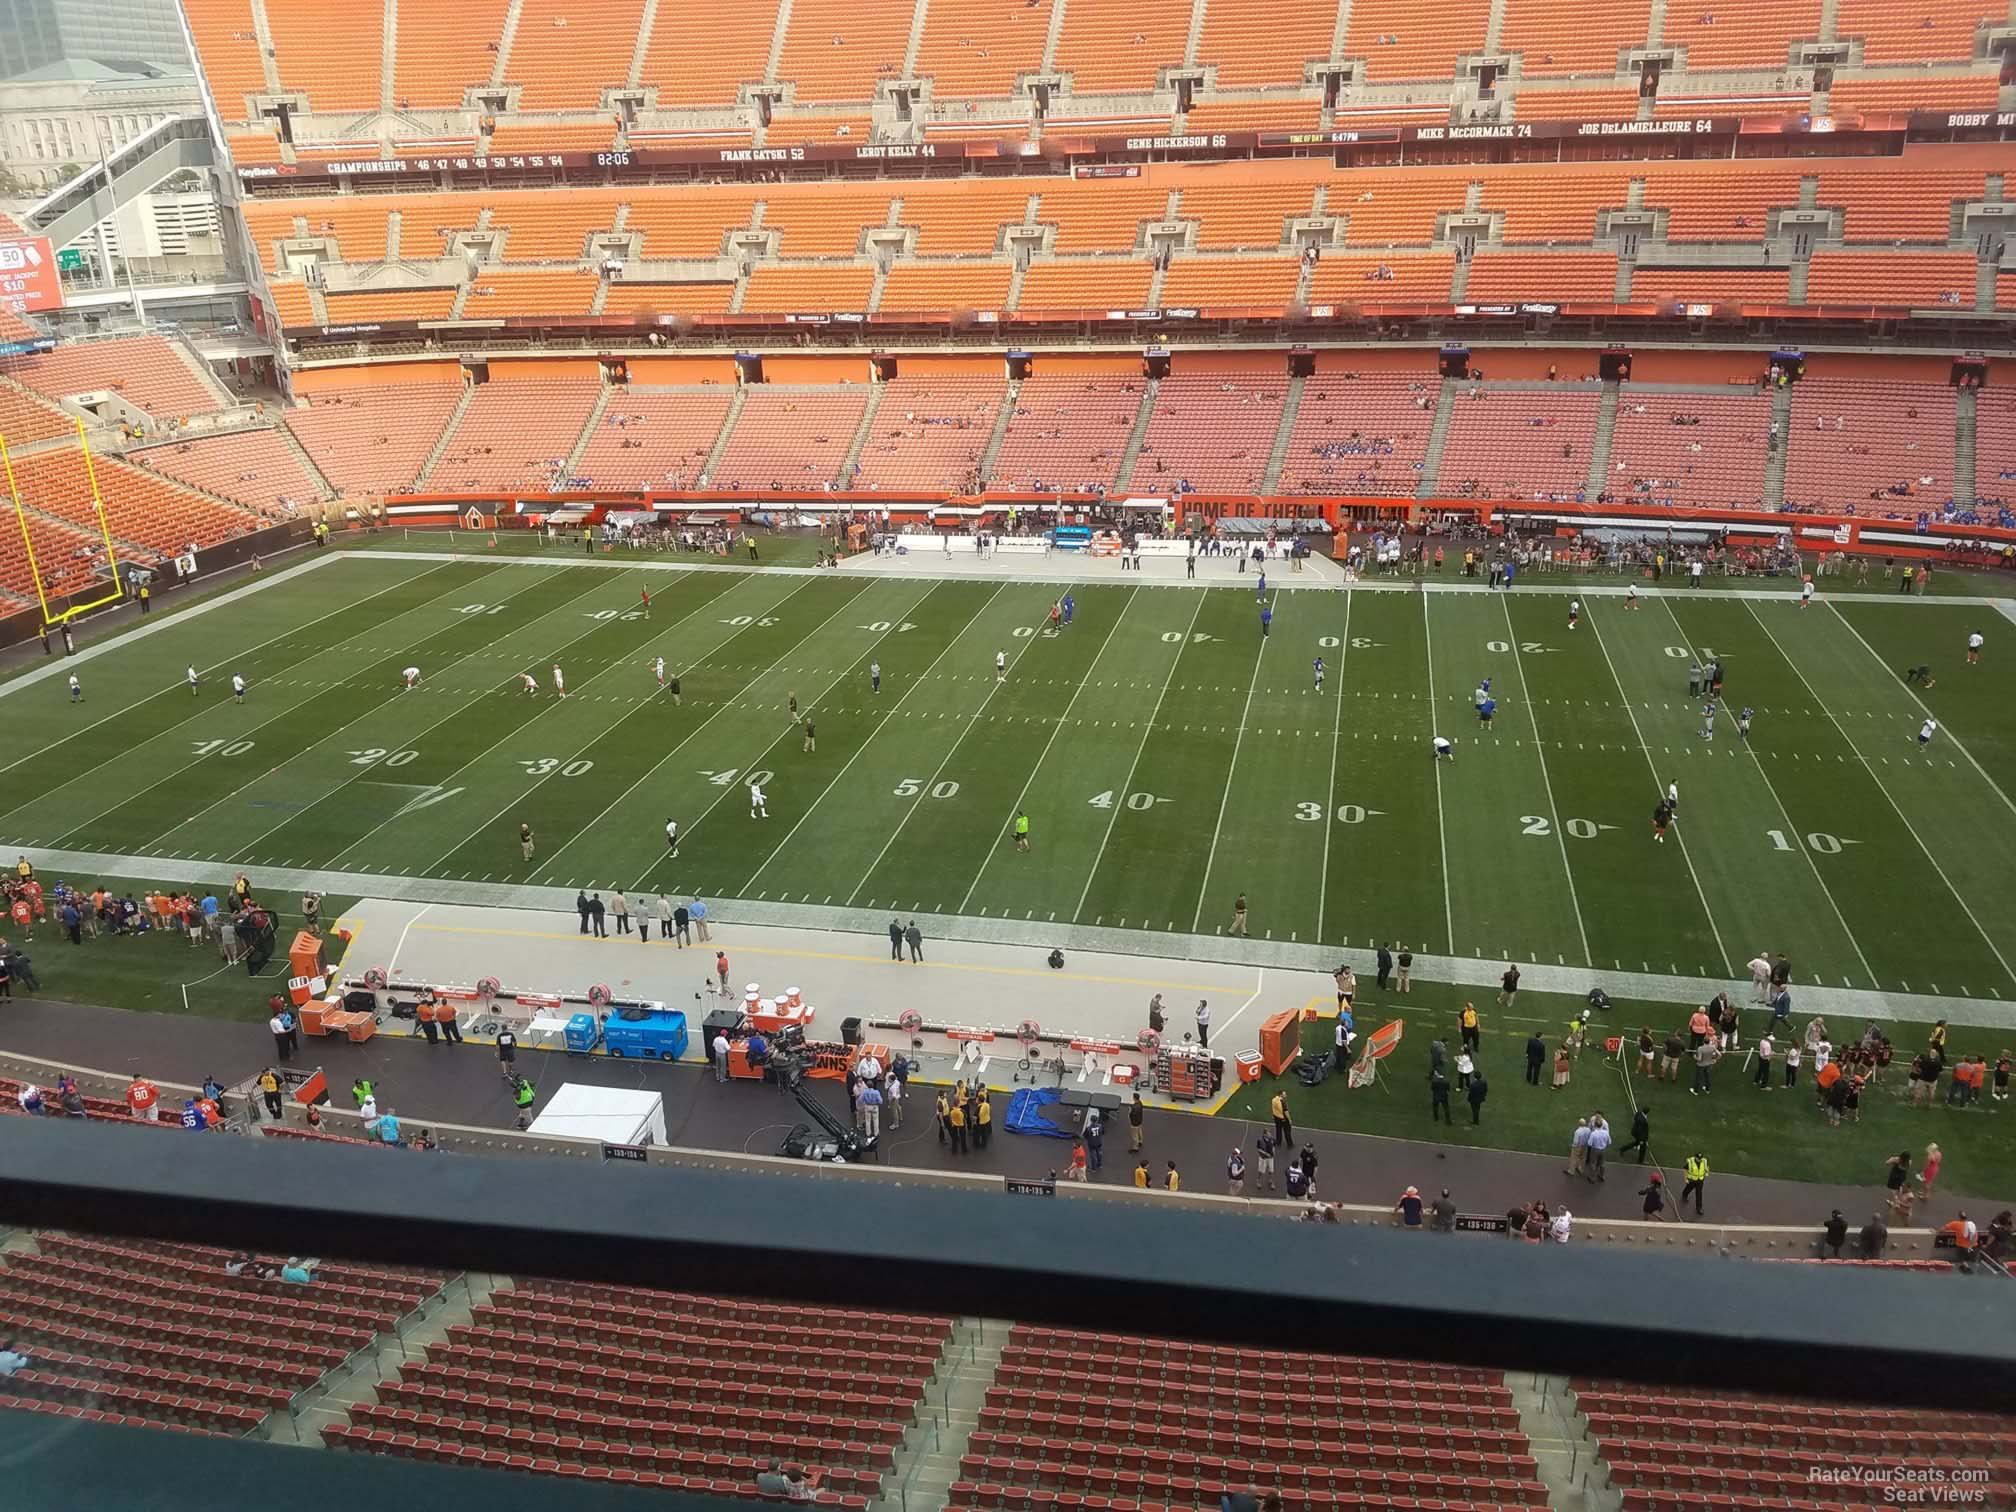 section 535, row 2 seat view  - cleveland browns stadium